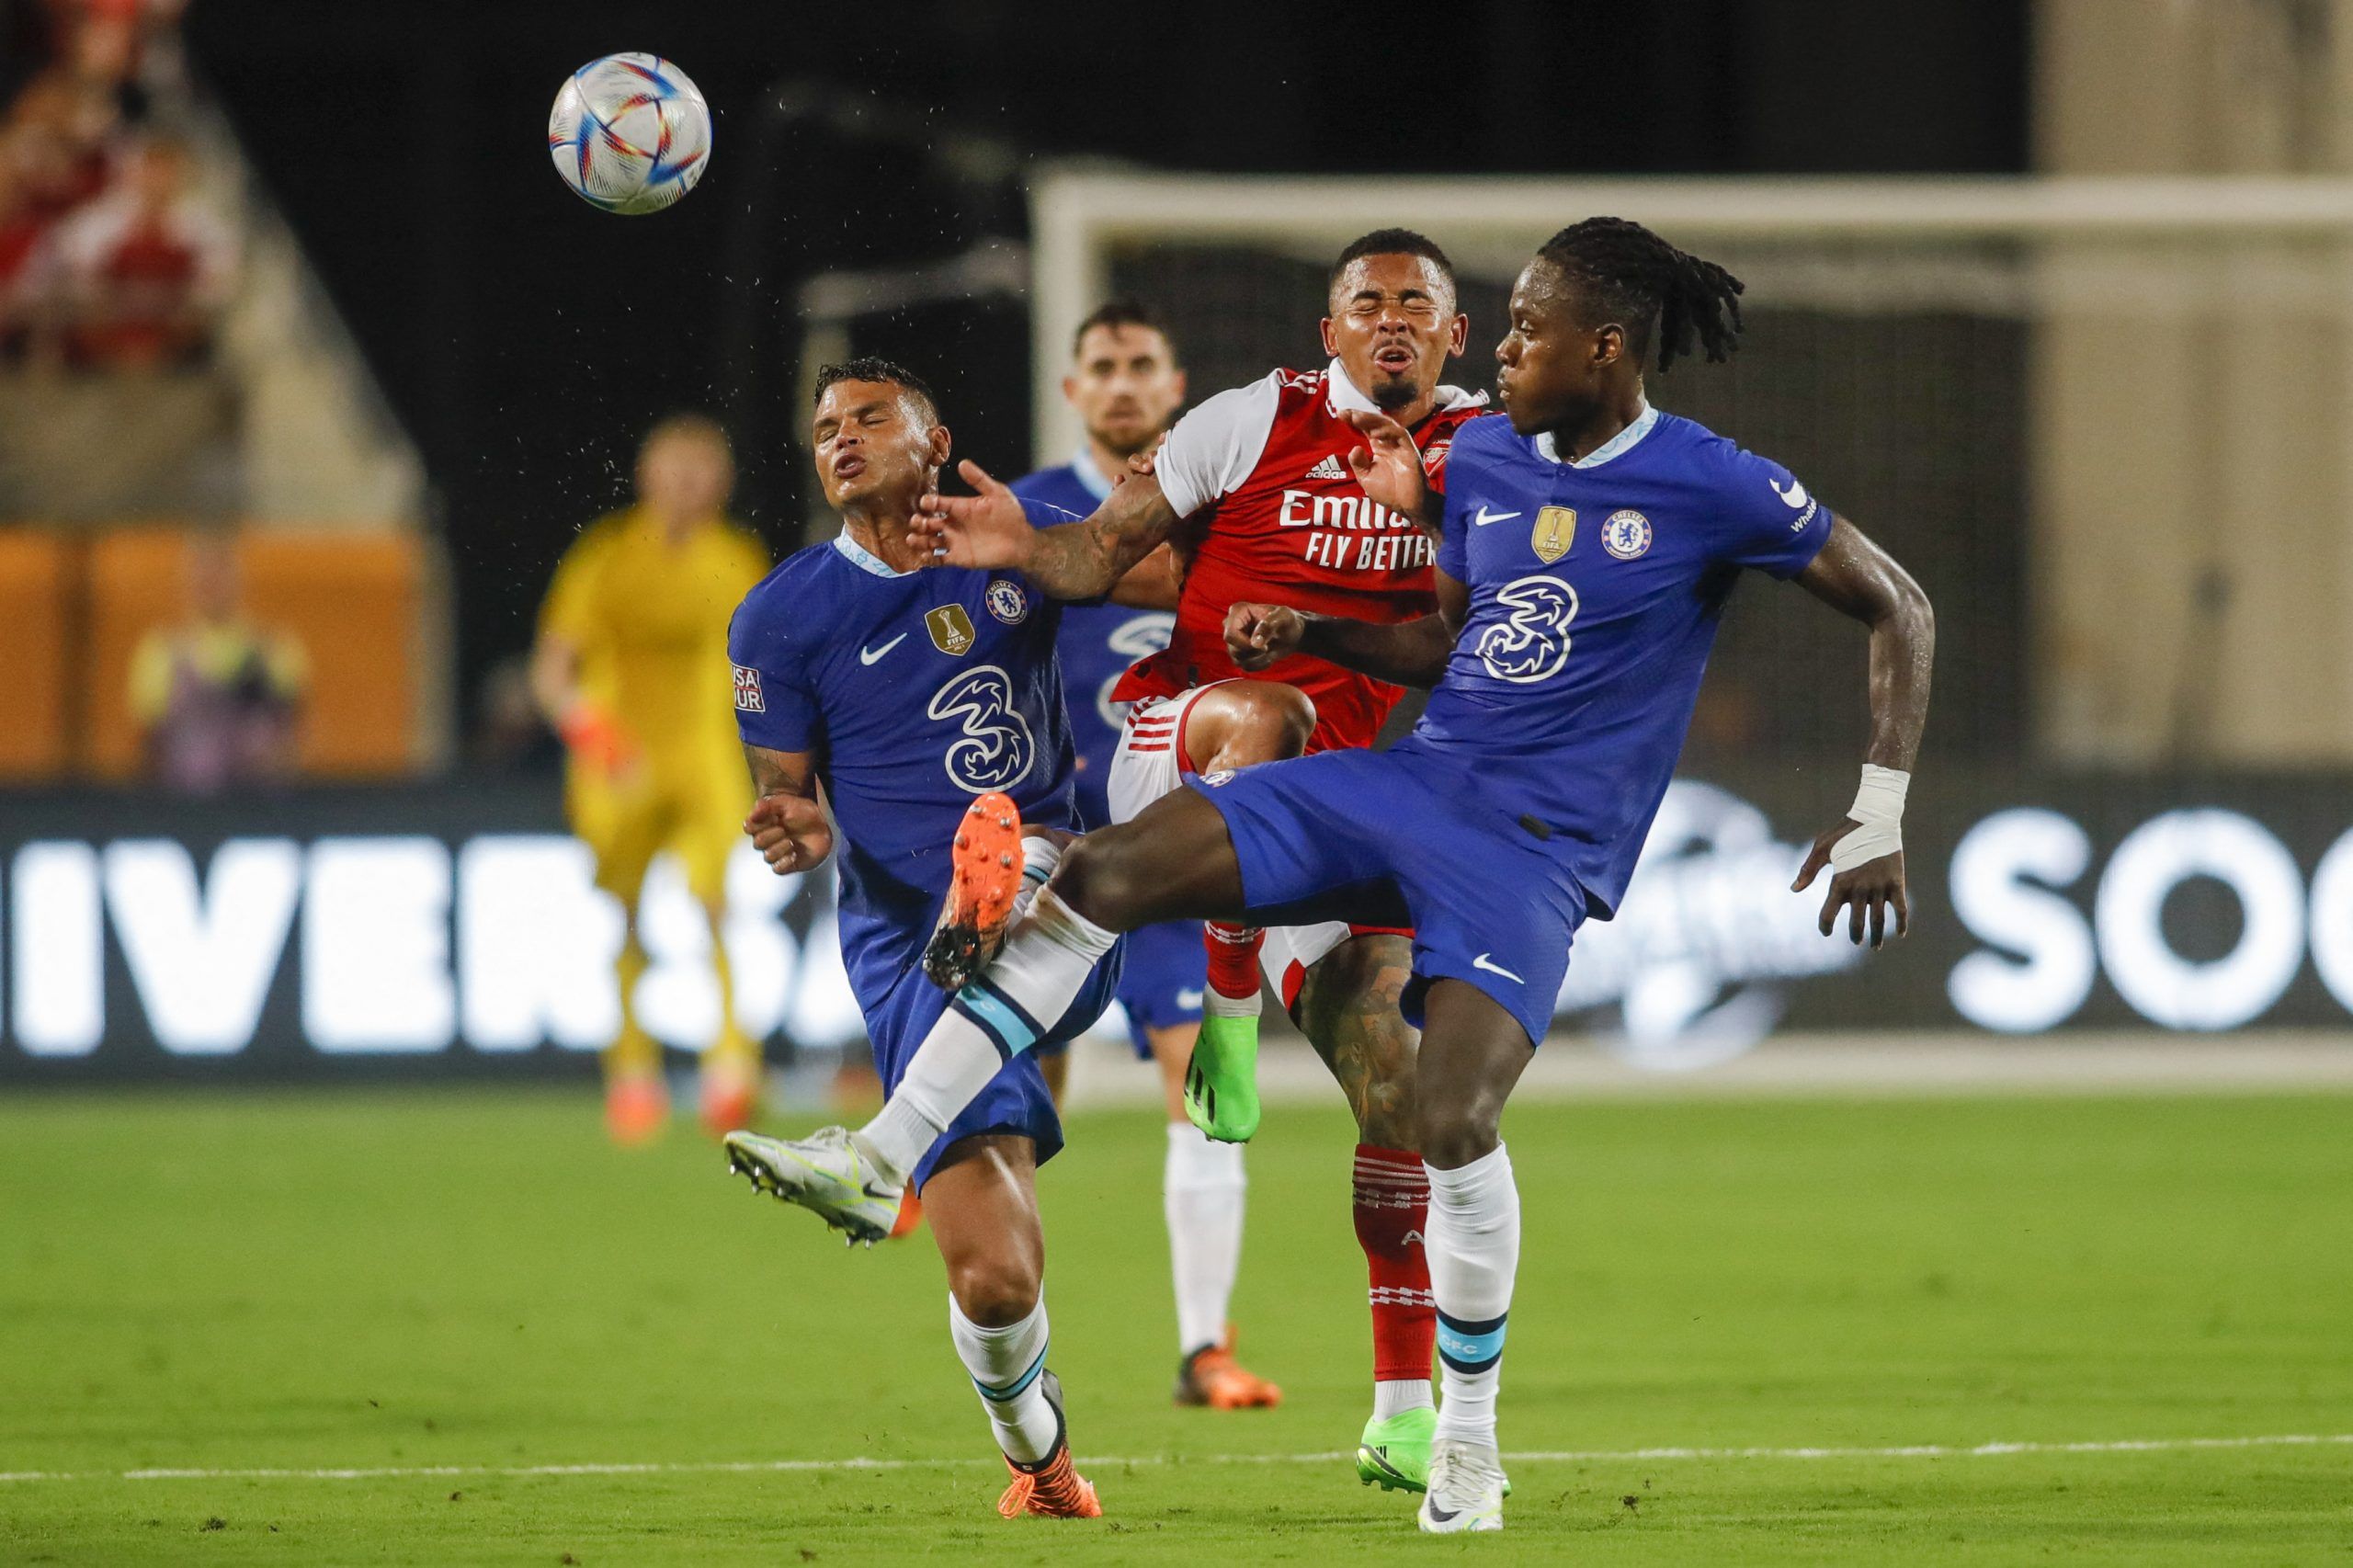 Jul 23, 2022; Orlando, FL, USA; Arsenal forward Gabriel Jesus (middle) battles for possession of the ball against Chelsea defender Thiago Silva (left) and midfielder Trevoh Chalobah (14) during the first half at Camping World Stadium. Mandatory Credit: Sam Navarro-USA TODAY Sports